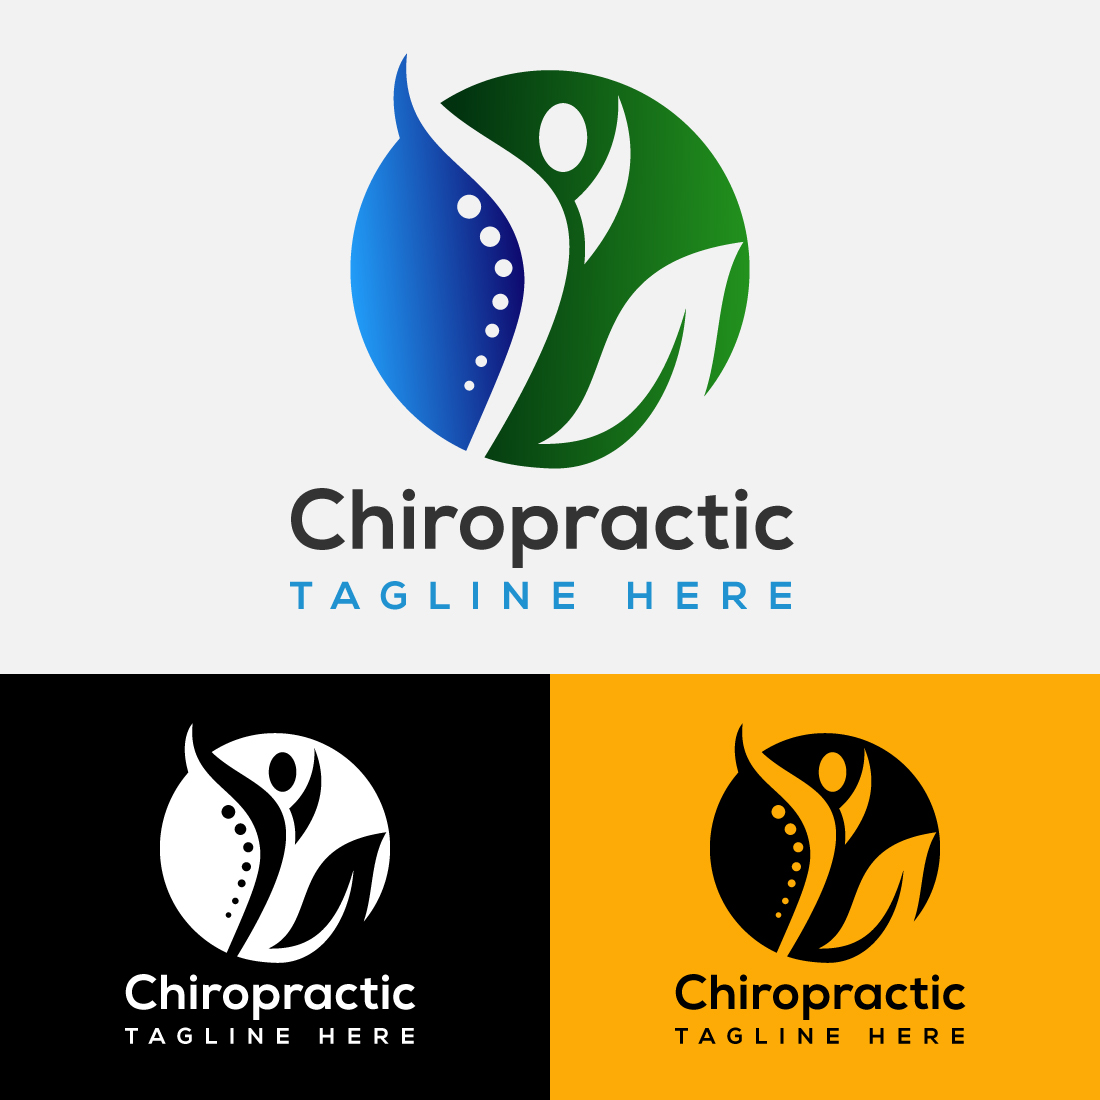 Medical Chiropractic Spine Logo Vector Design cover image.